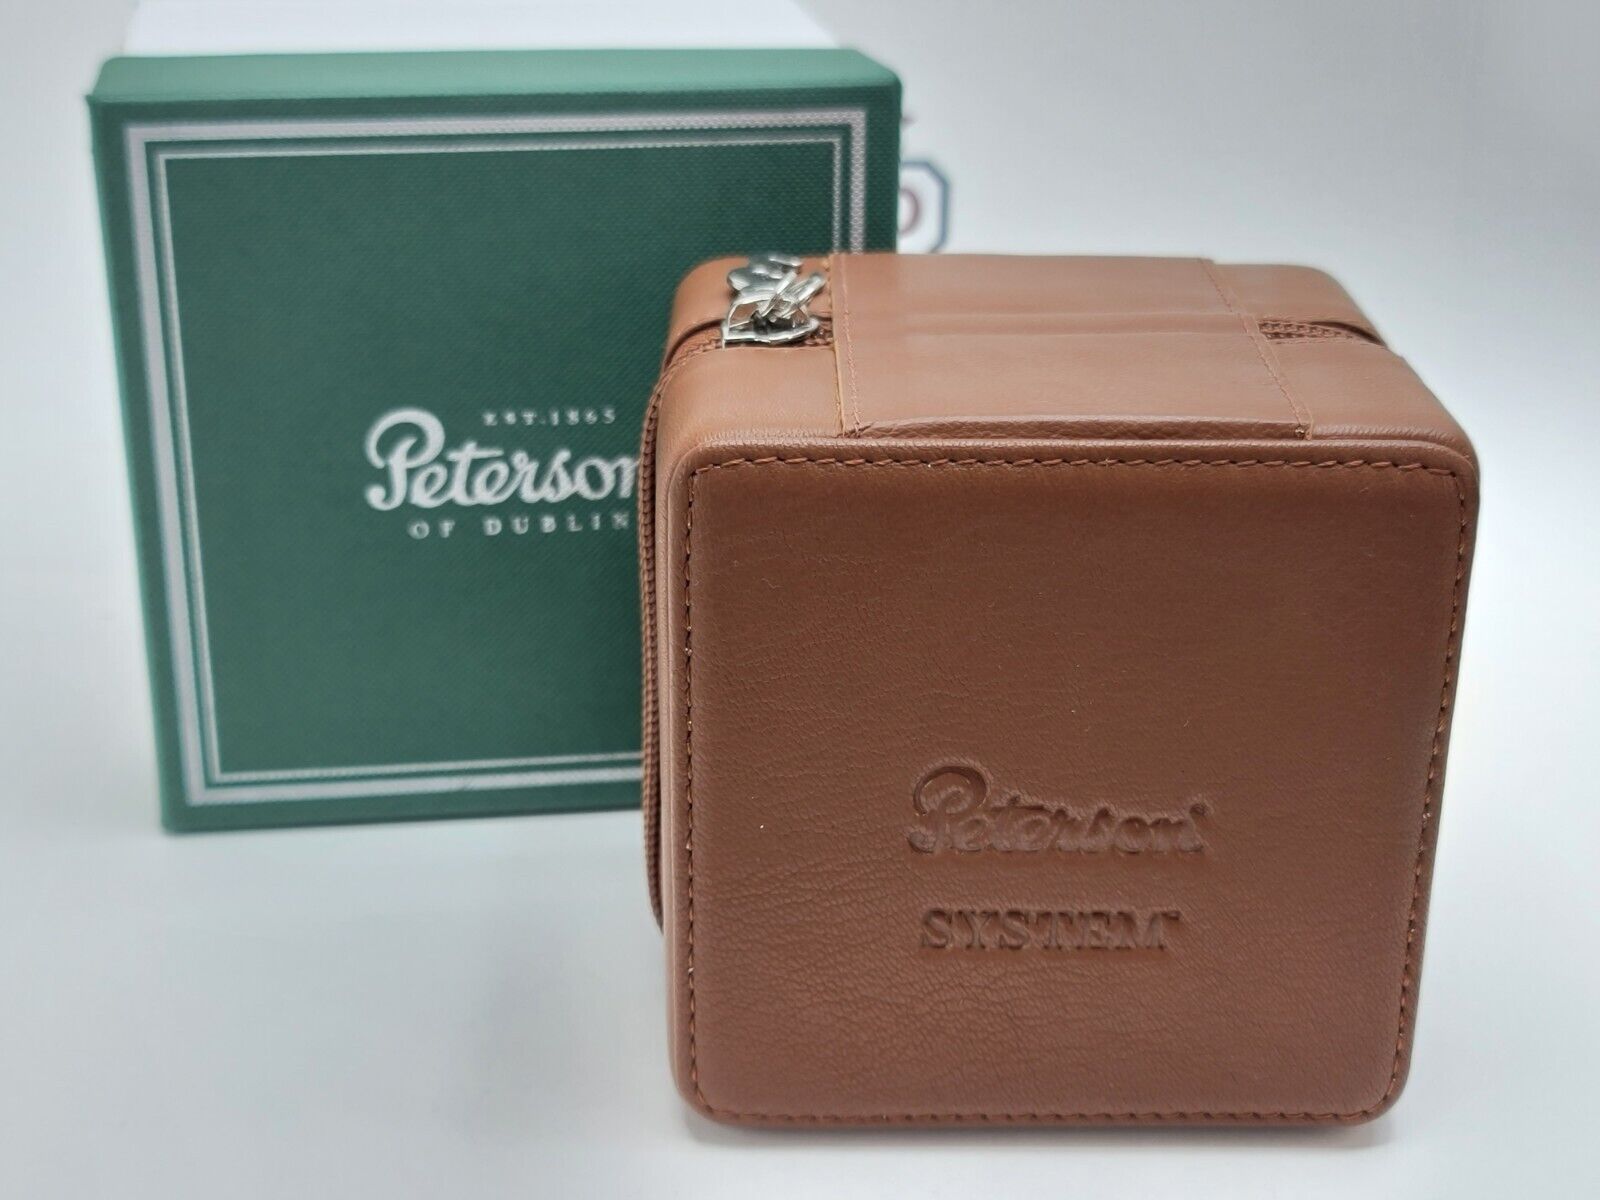 Peterson Grafton System Tobacco Pipe Travel Case, Leather Pipe Box, New